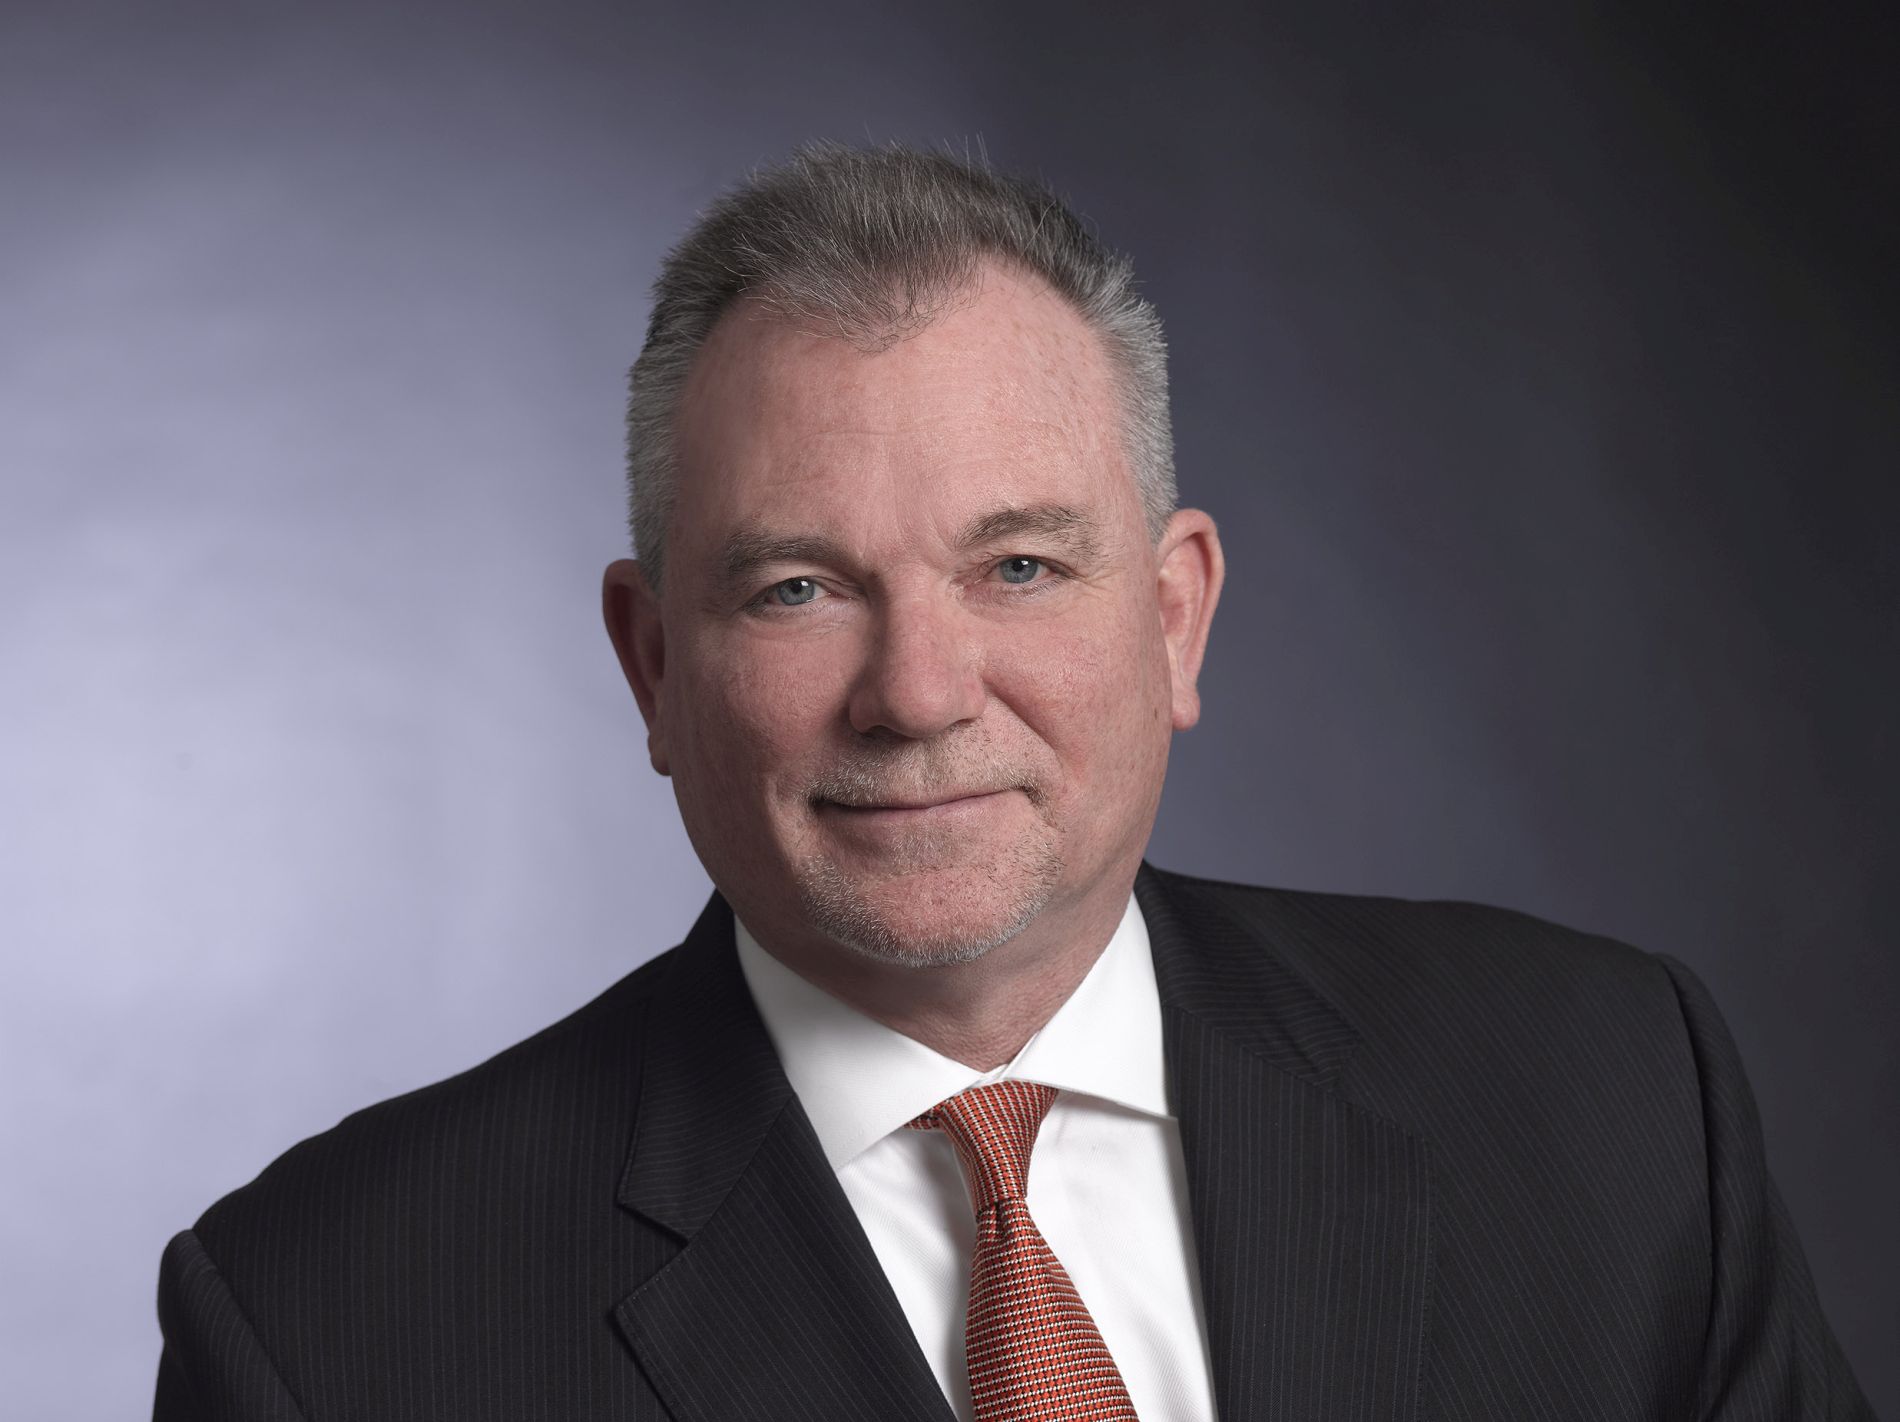 Kevin O’Connor is the Chief Executive Officer of New York’s Dime Community Bank